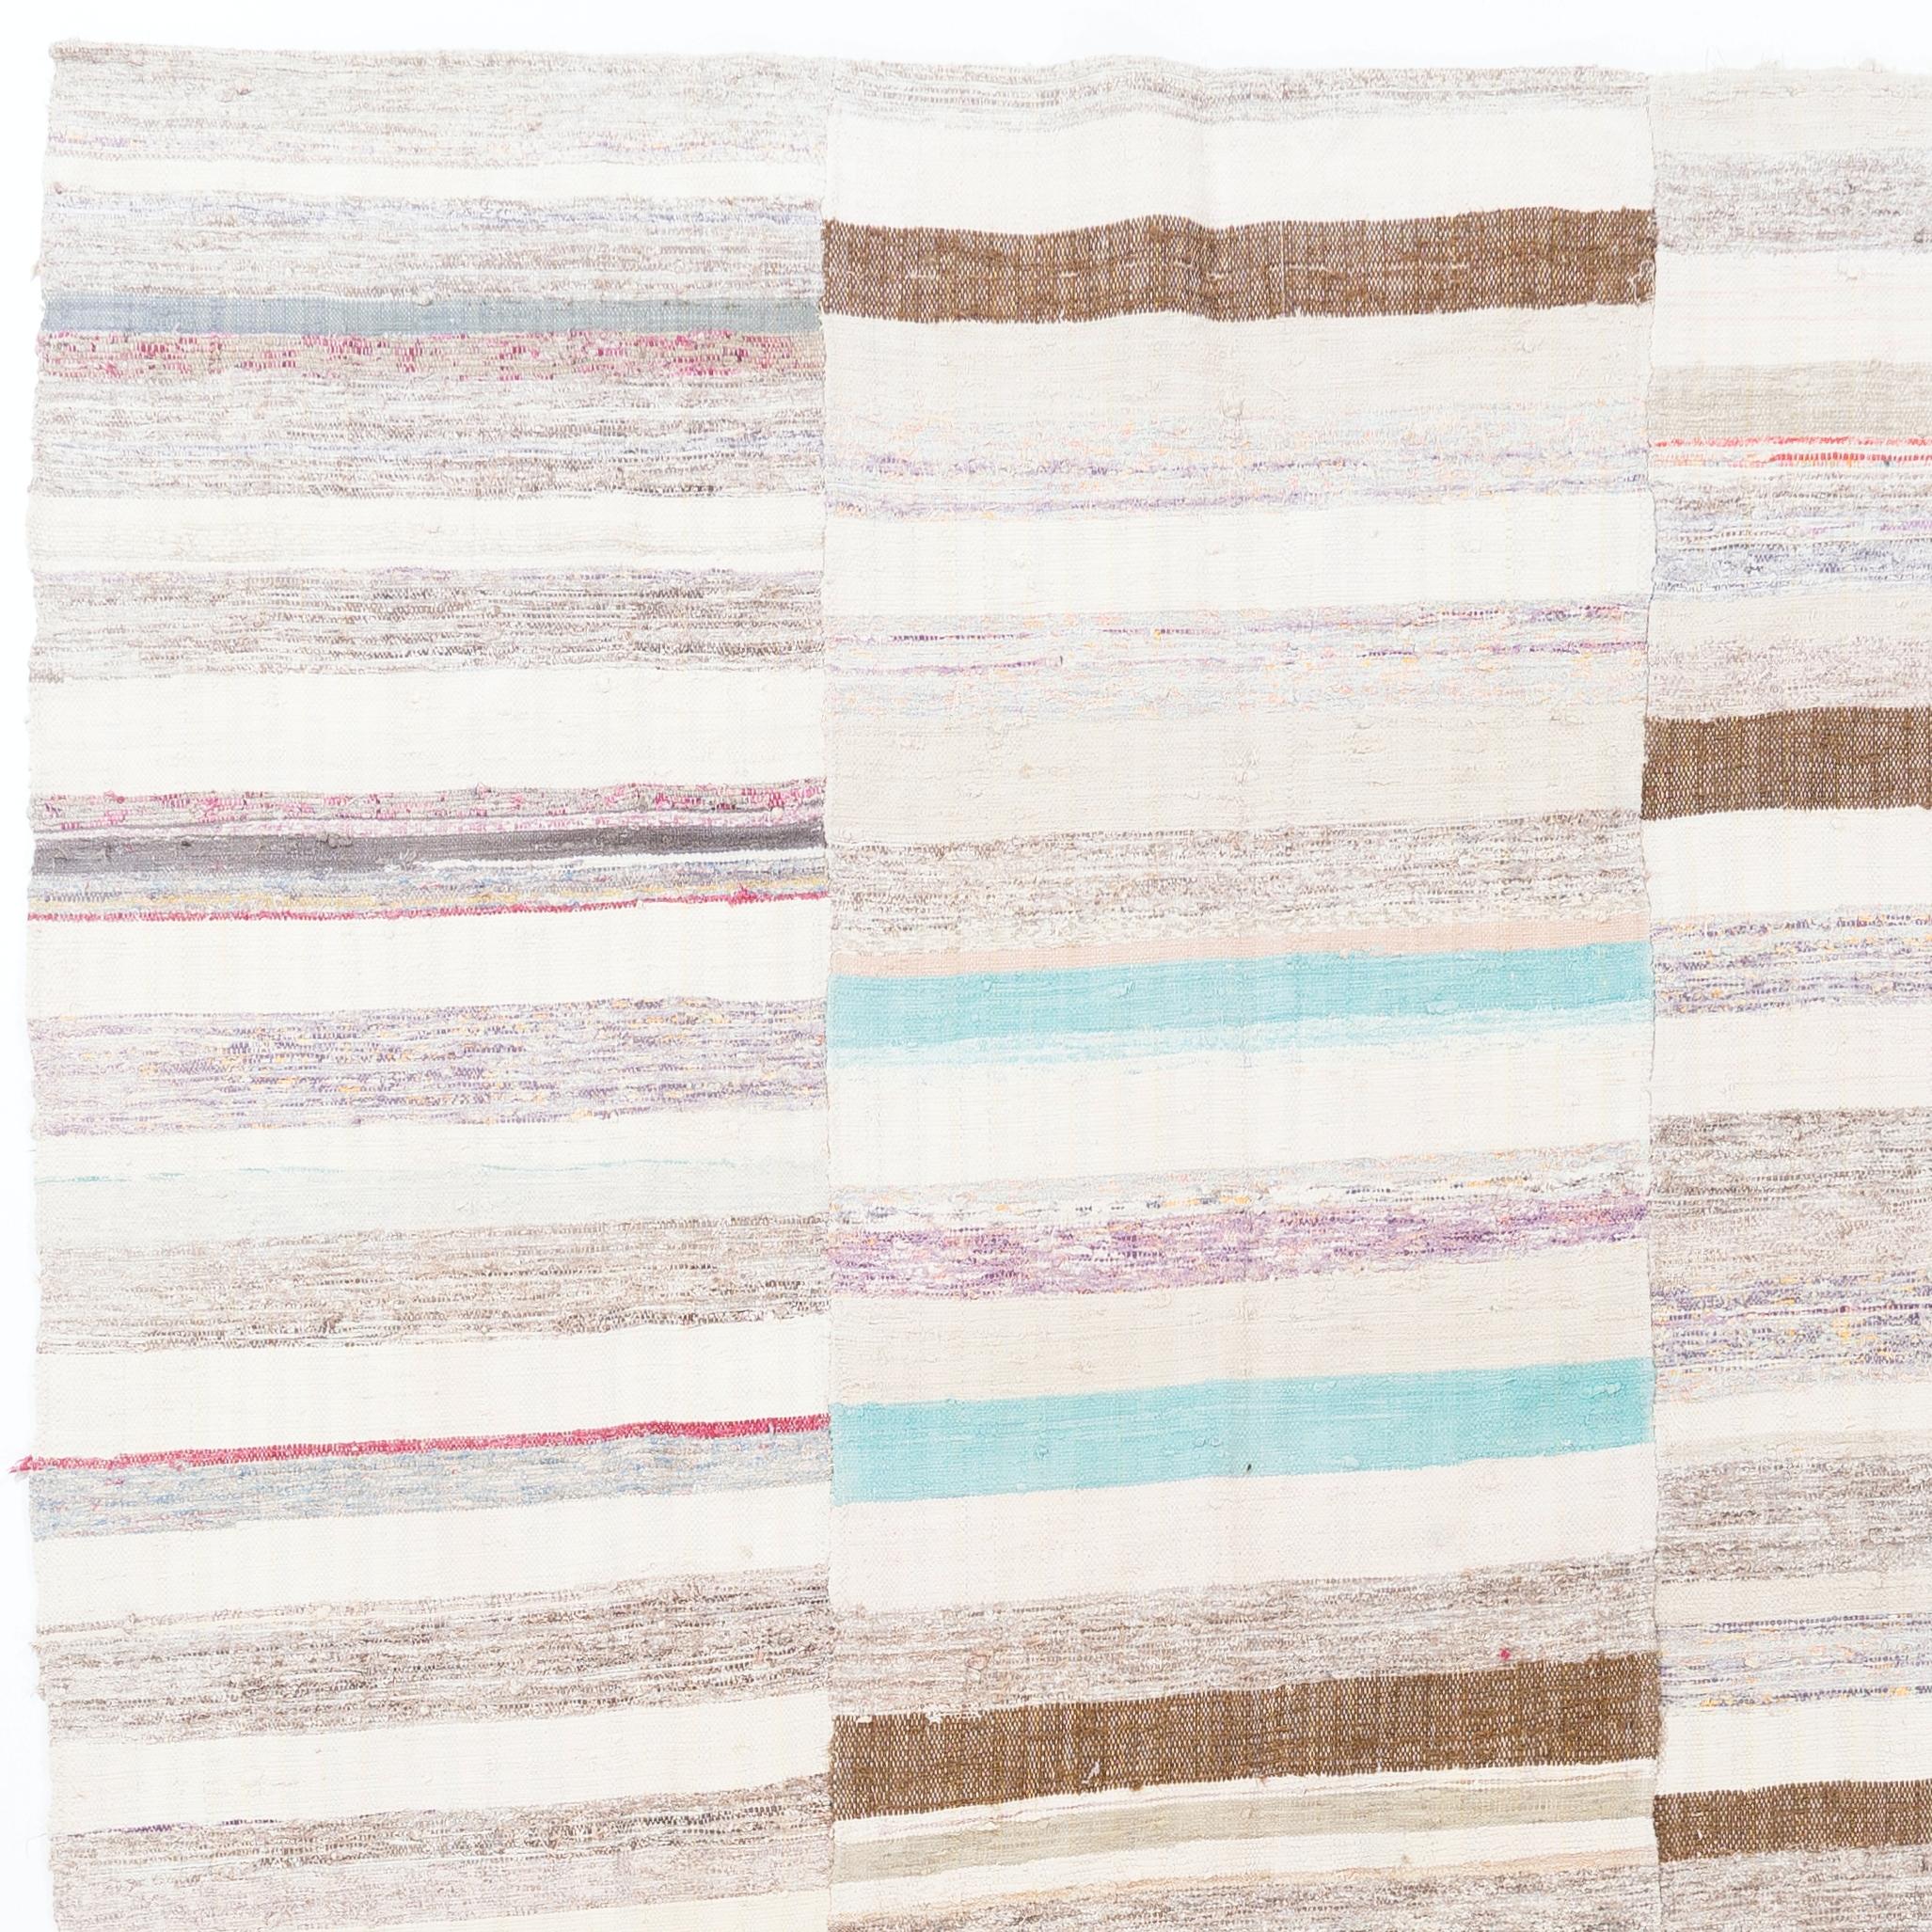 A vintage Turkish handwoven banded kilim (flat-weave) with a simple striped design in soft, faded colors, made of cotton. Sturdy and lightweight.  Measures: 6.4 x 11.4 ft.

If requested, we can hand-stitch vintage pieces flat-woven Kilim rugs like